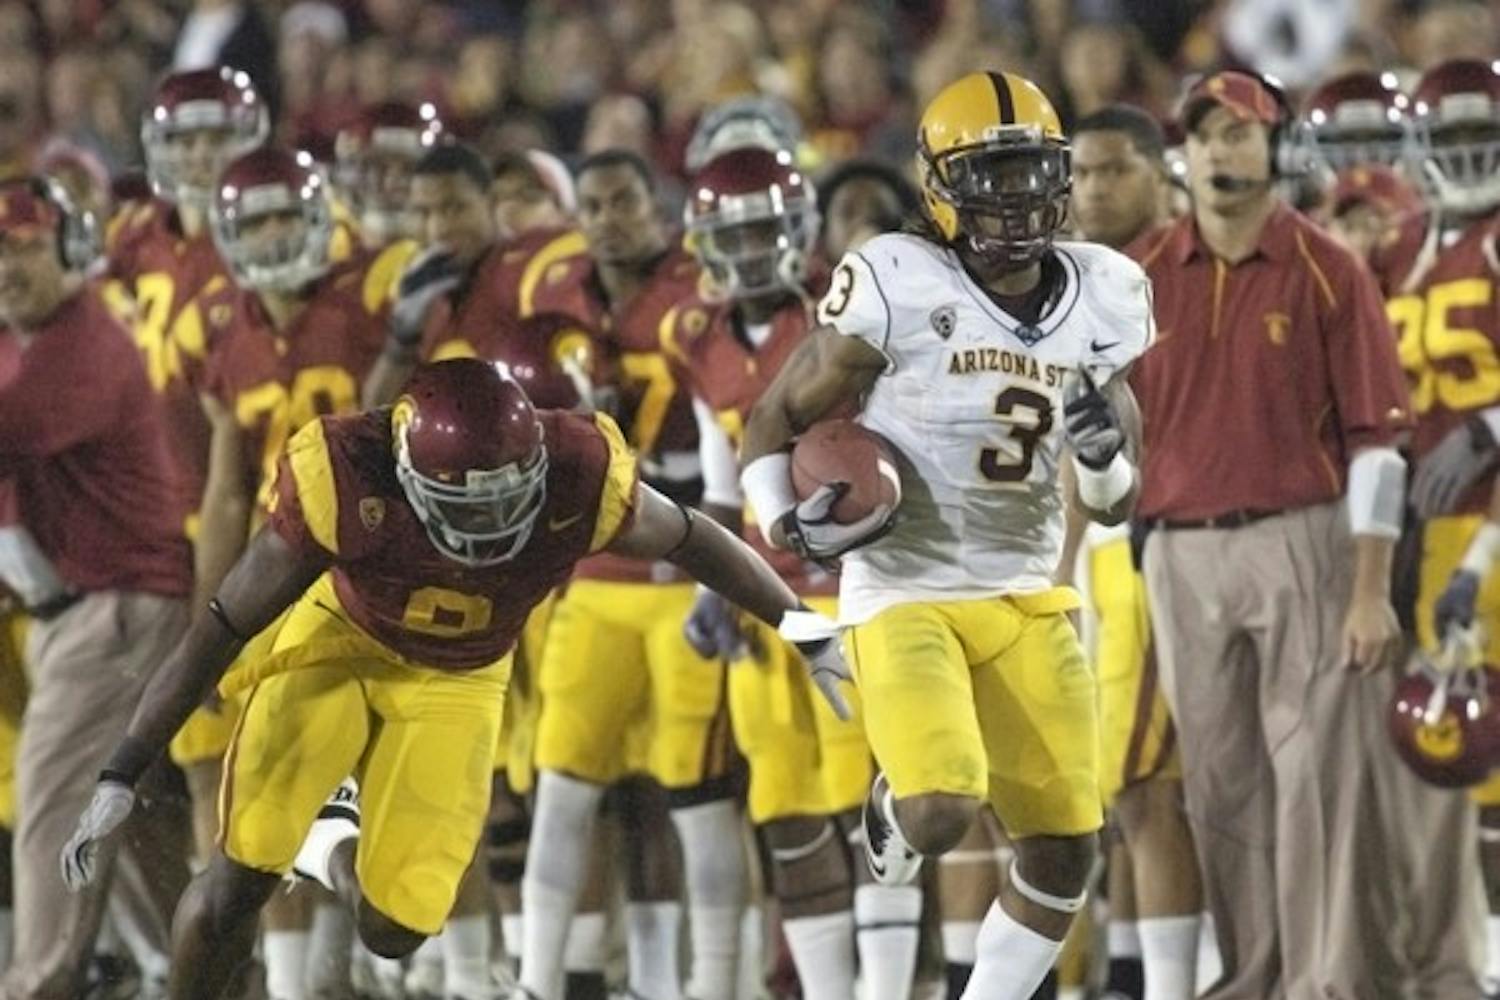 GOING, GONE: ASU senior Omar Bolden runs the ball down the sideline after making an interception during the Sun Devils’ loss to USC last season. Despite being sidelined for the year due to injury, Bolden remains an integral part of the team. (Photo by Scott Stuk)